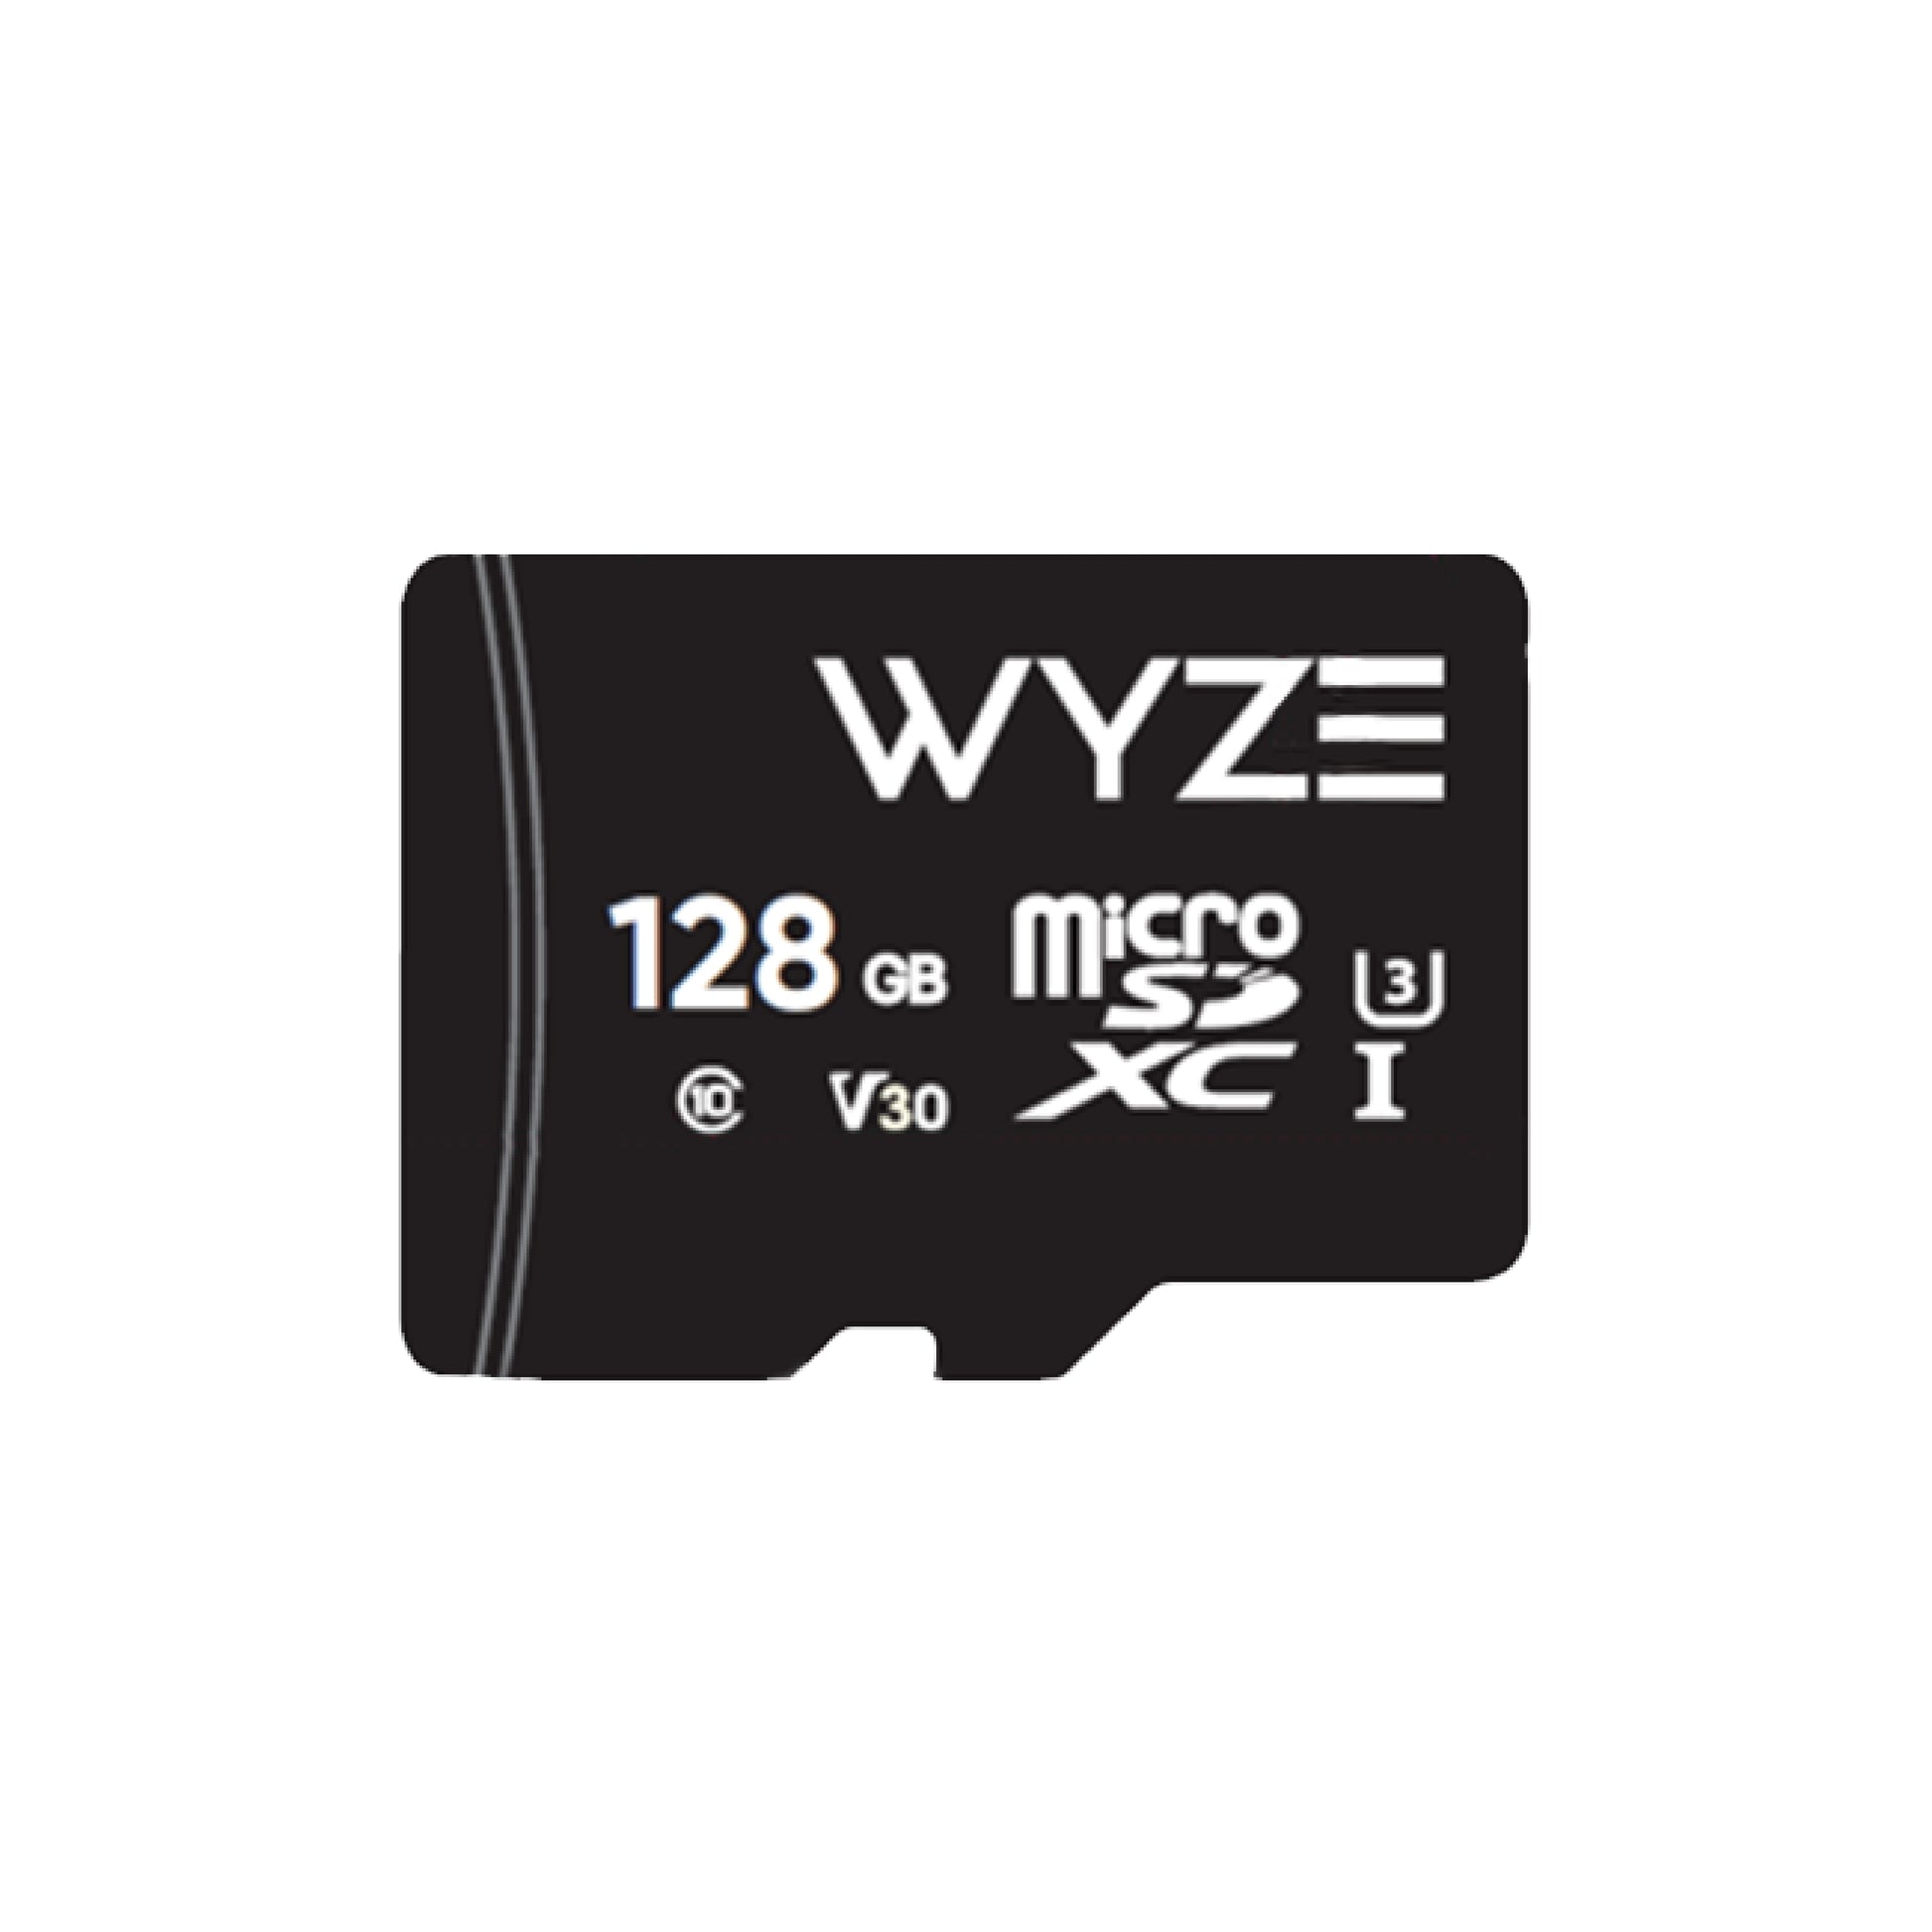 Black 128B microSD card with the Wyze logo on it. Includes Class 10 and UHS-3 (U3) labelling. 